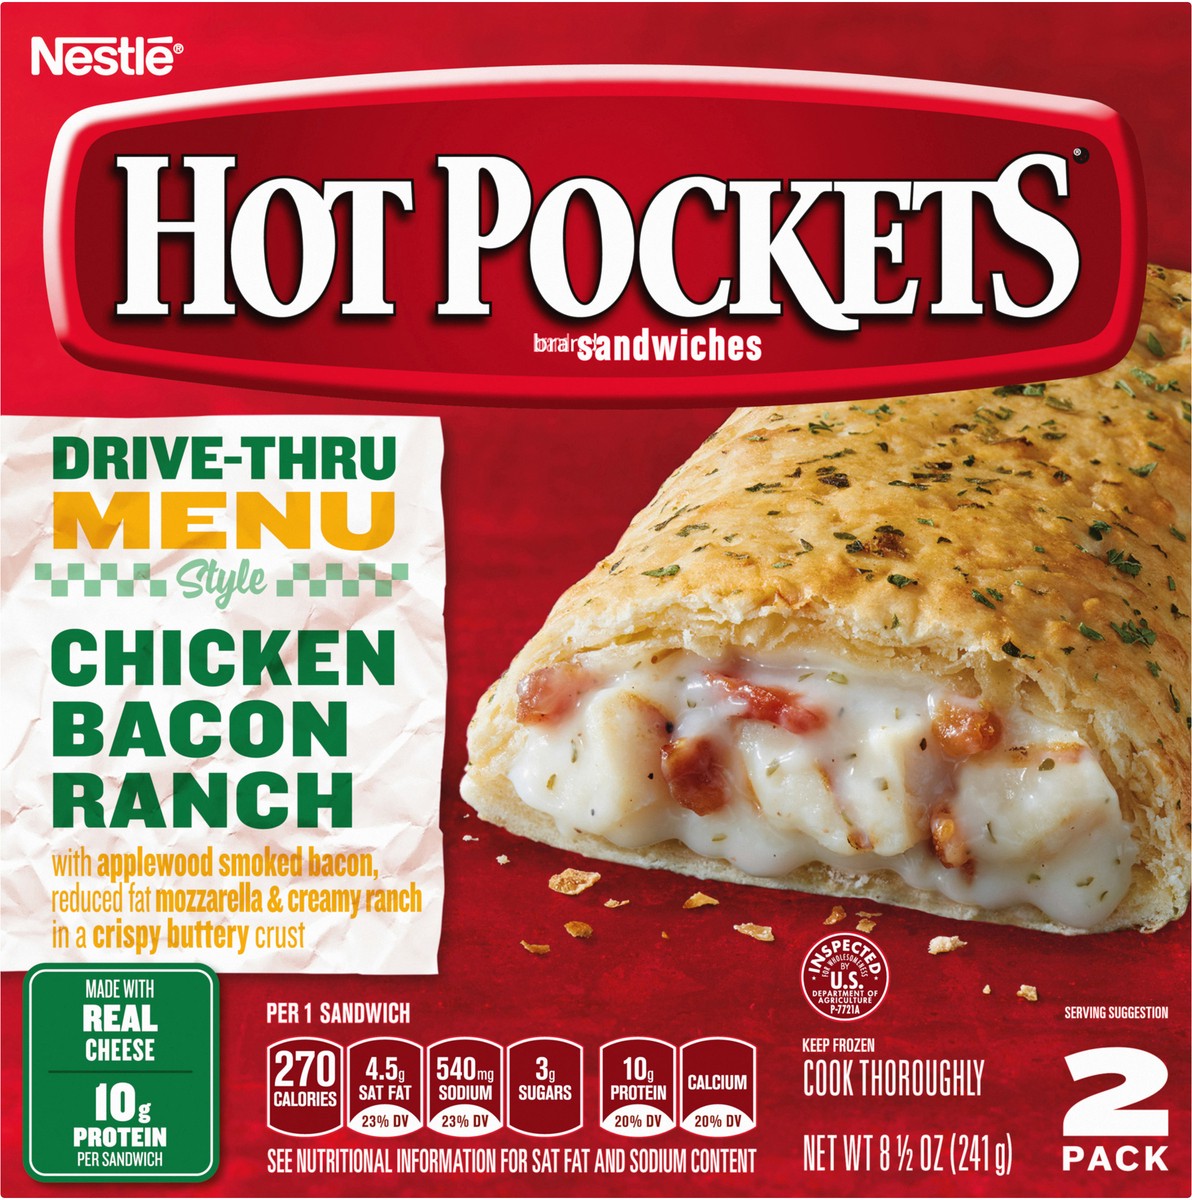 slide 5 of 8, Hot Pockets Hot Ones Spicy Garlic Chicken & Bacon Frozen Snacks in a Crispy Buttery Crust, Sandwich Snacks Made with Bacon, 2 Count Frozen Sandwiches, 8.5 oz